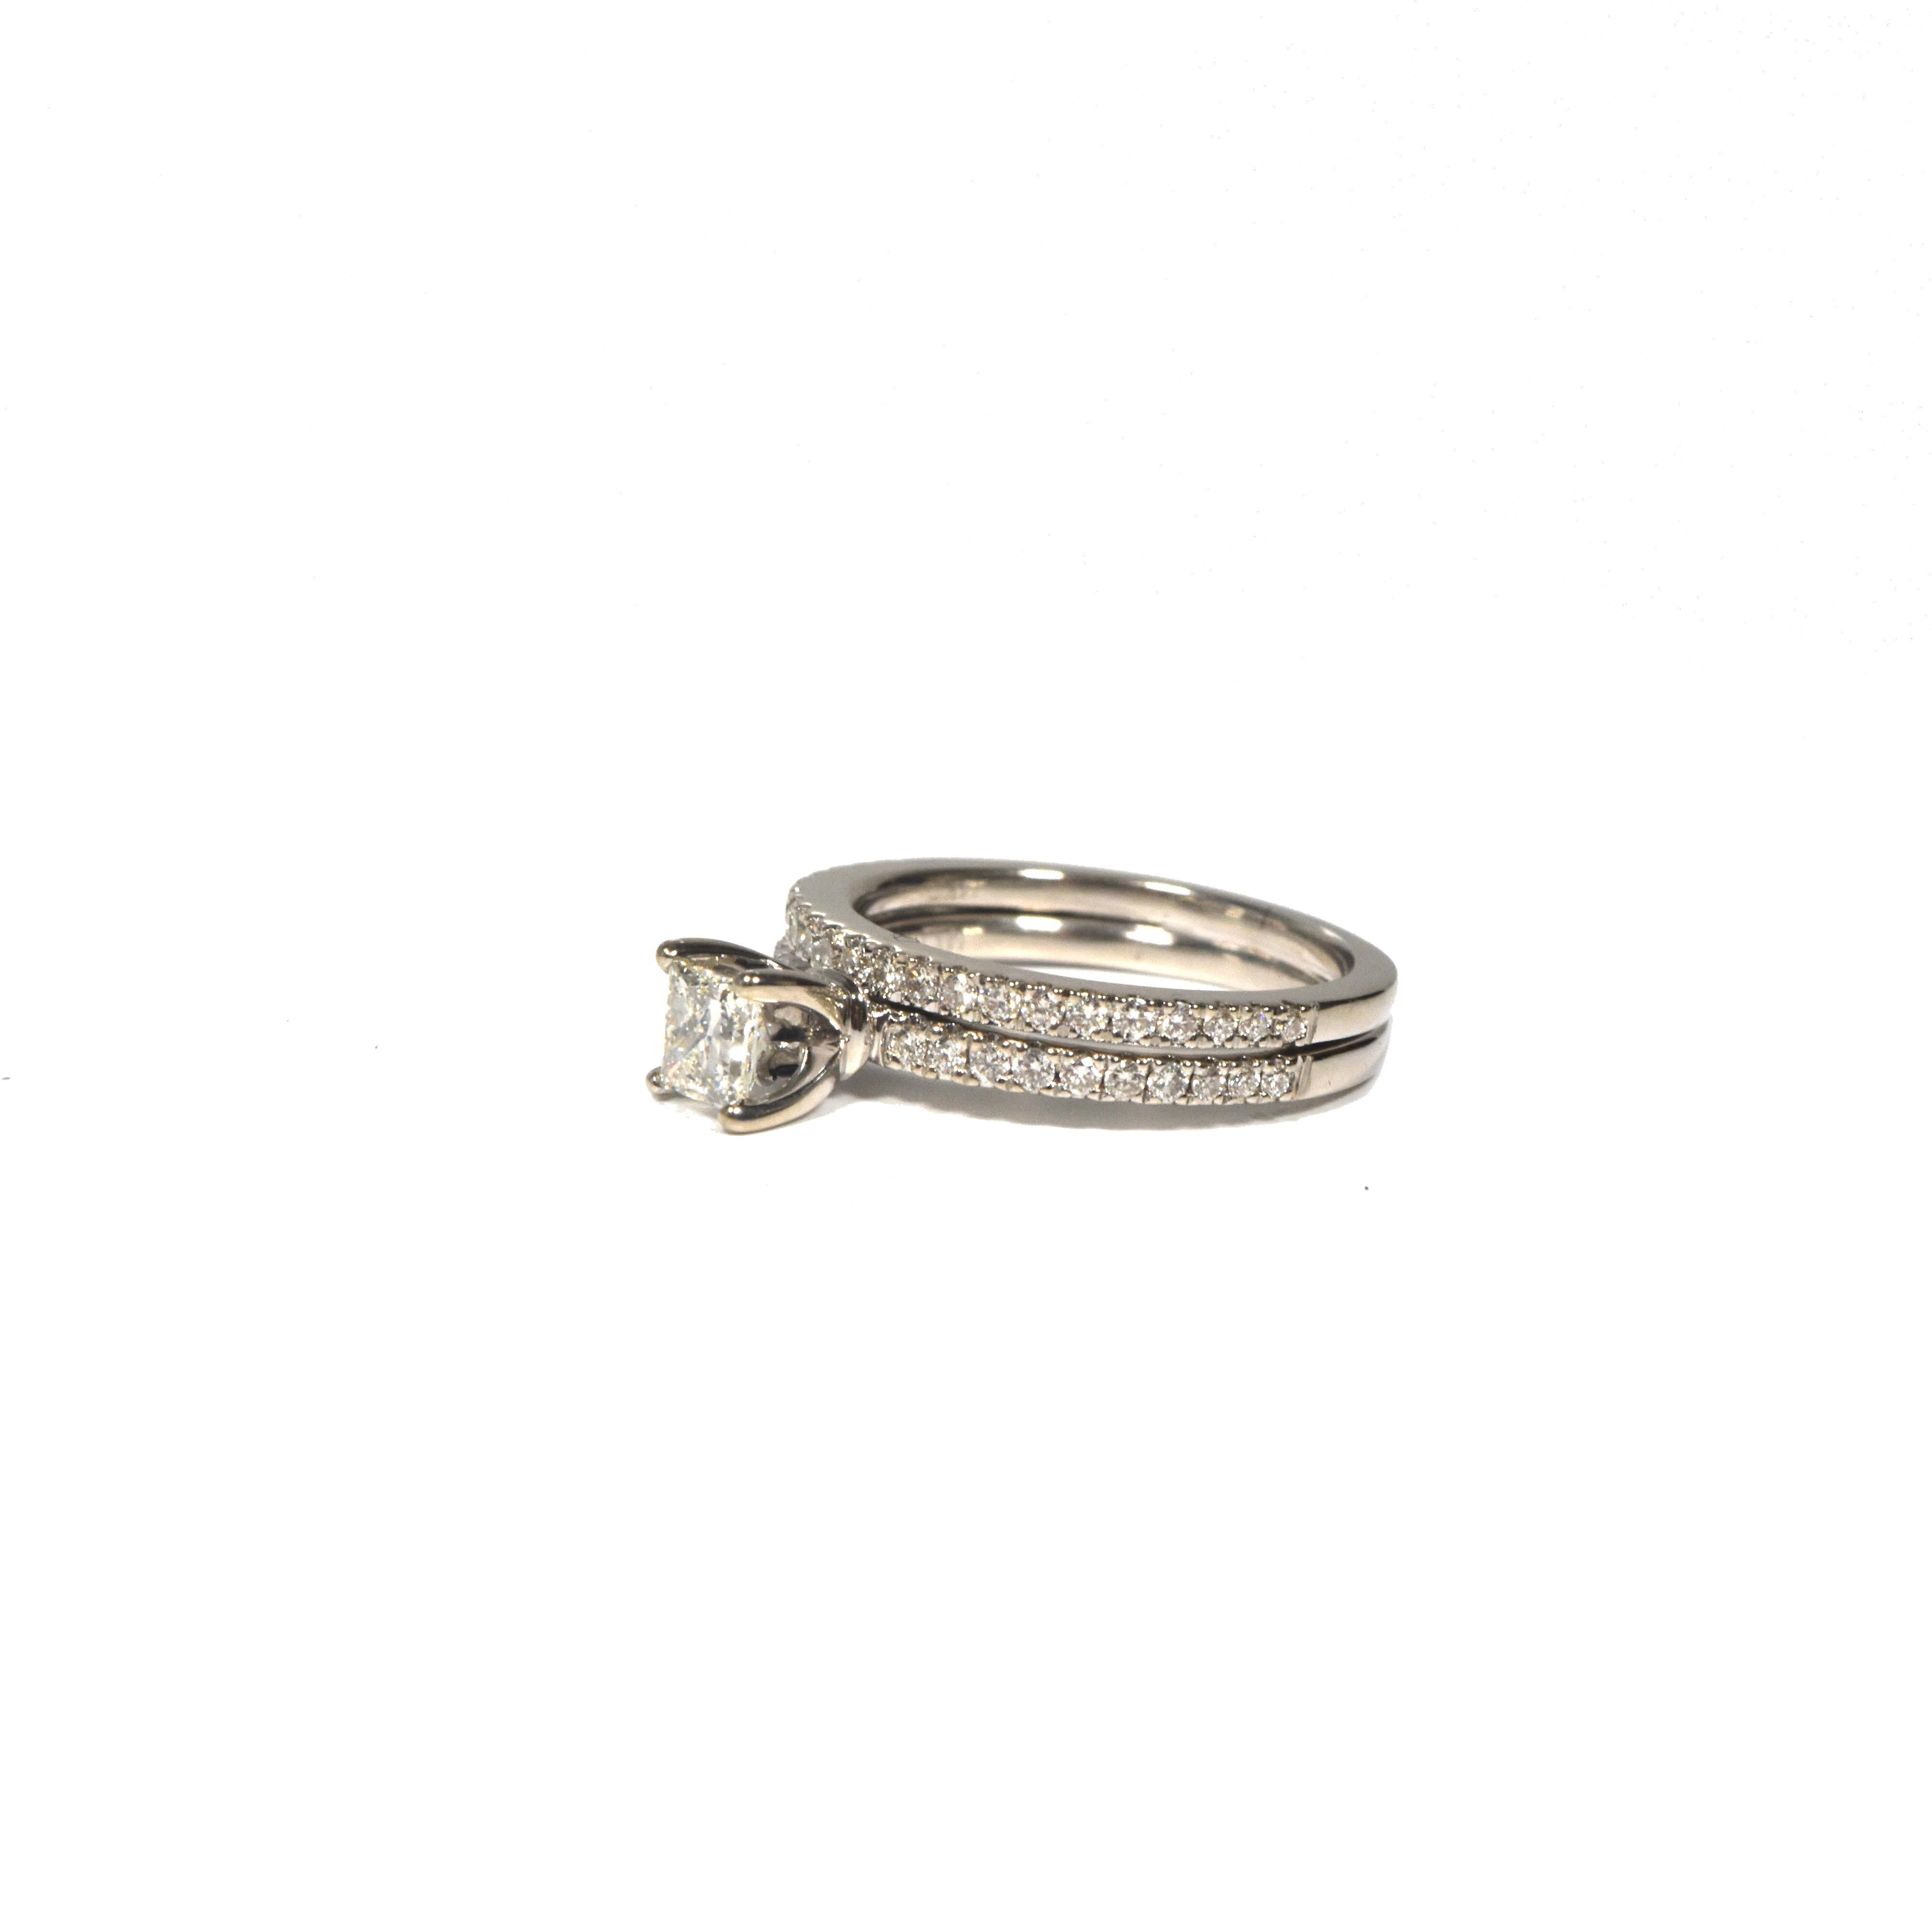 Vera Wang believes in modern, elegant designs that enhance the beauty of any bride. This beautiful 14k white gold and diamond pre-owned ring in mint condition, is the perfect example of the elegance of the timeless pieces produced by the designer